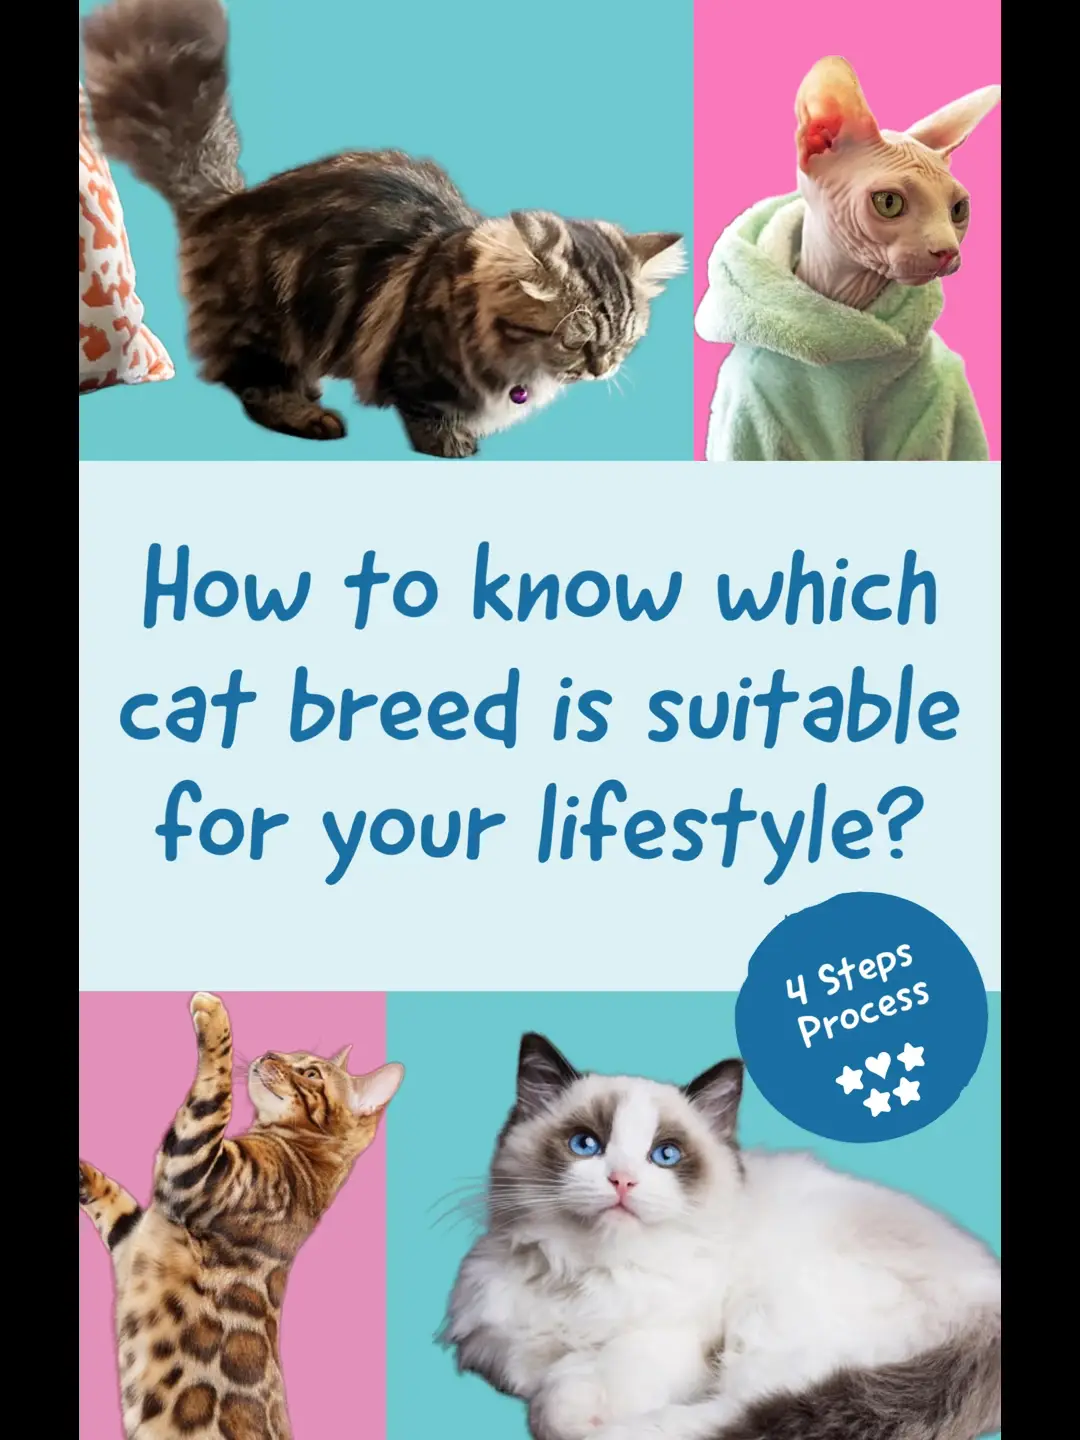 Quiz: What Cat Breed Are You? Find Out Now